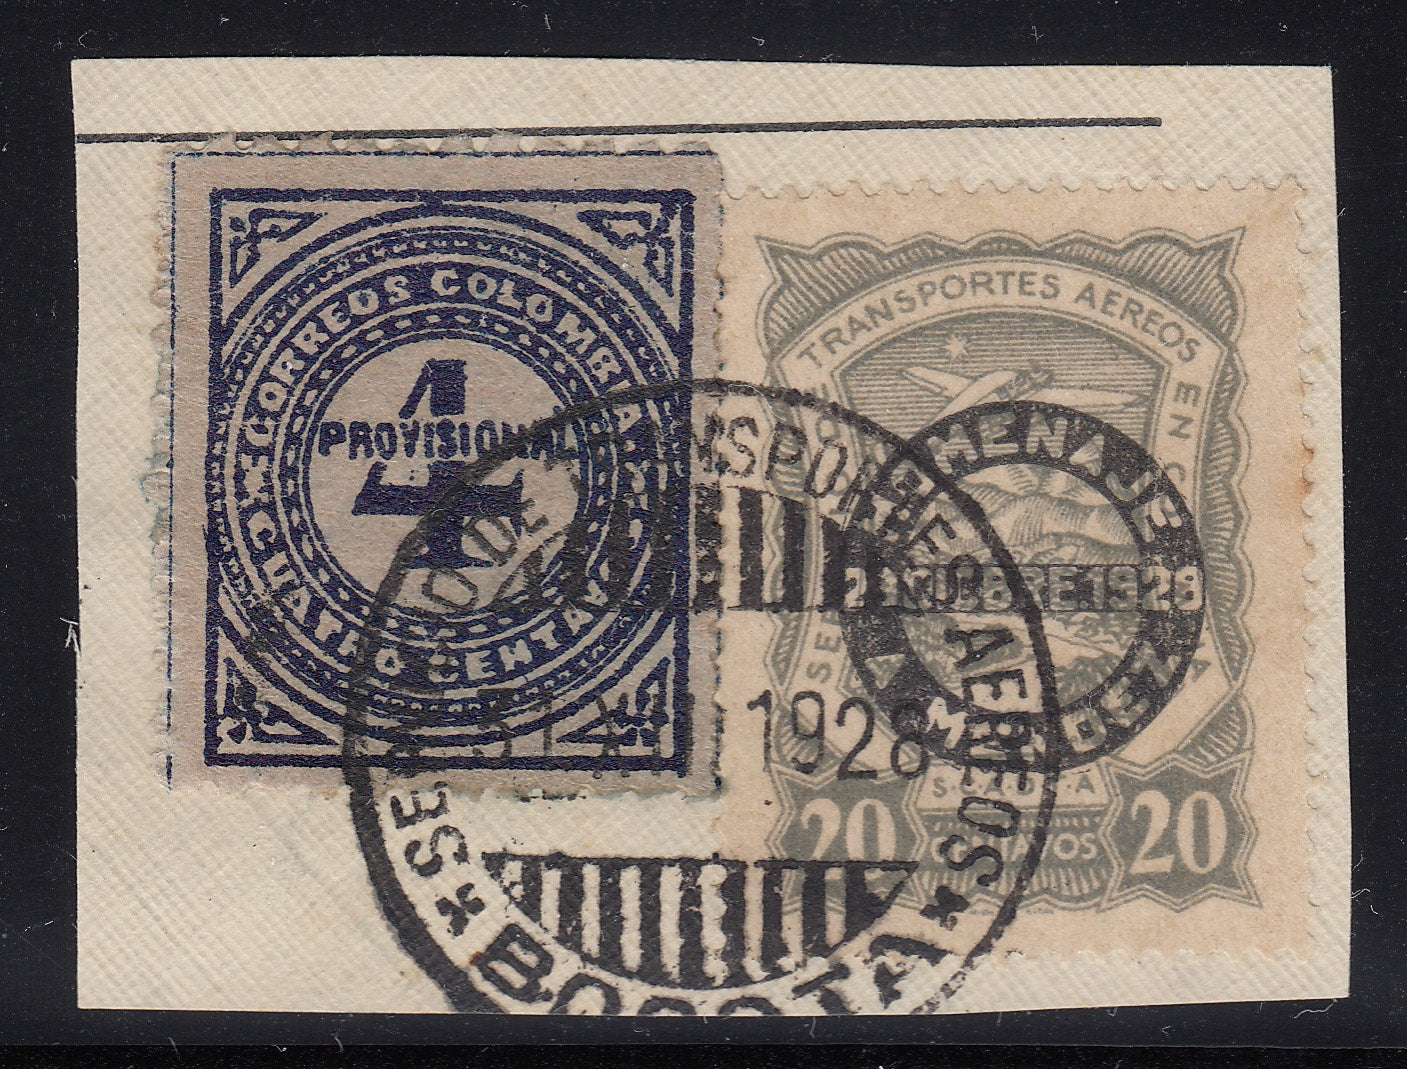 Colombia SCADTA 1928 Mendez Overprint Airmail Used tied with 4c Provisional on Piece. Sct C53